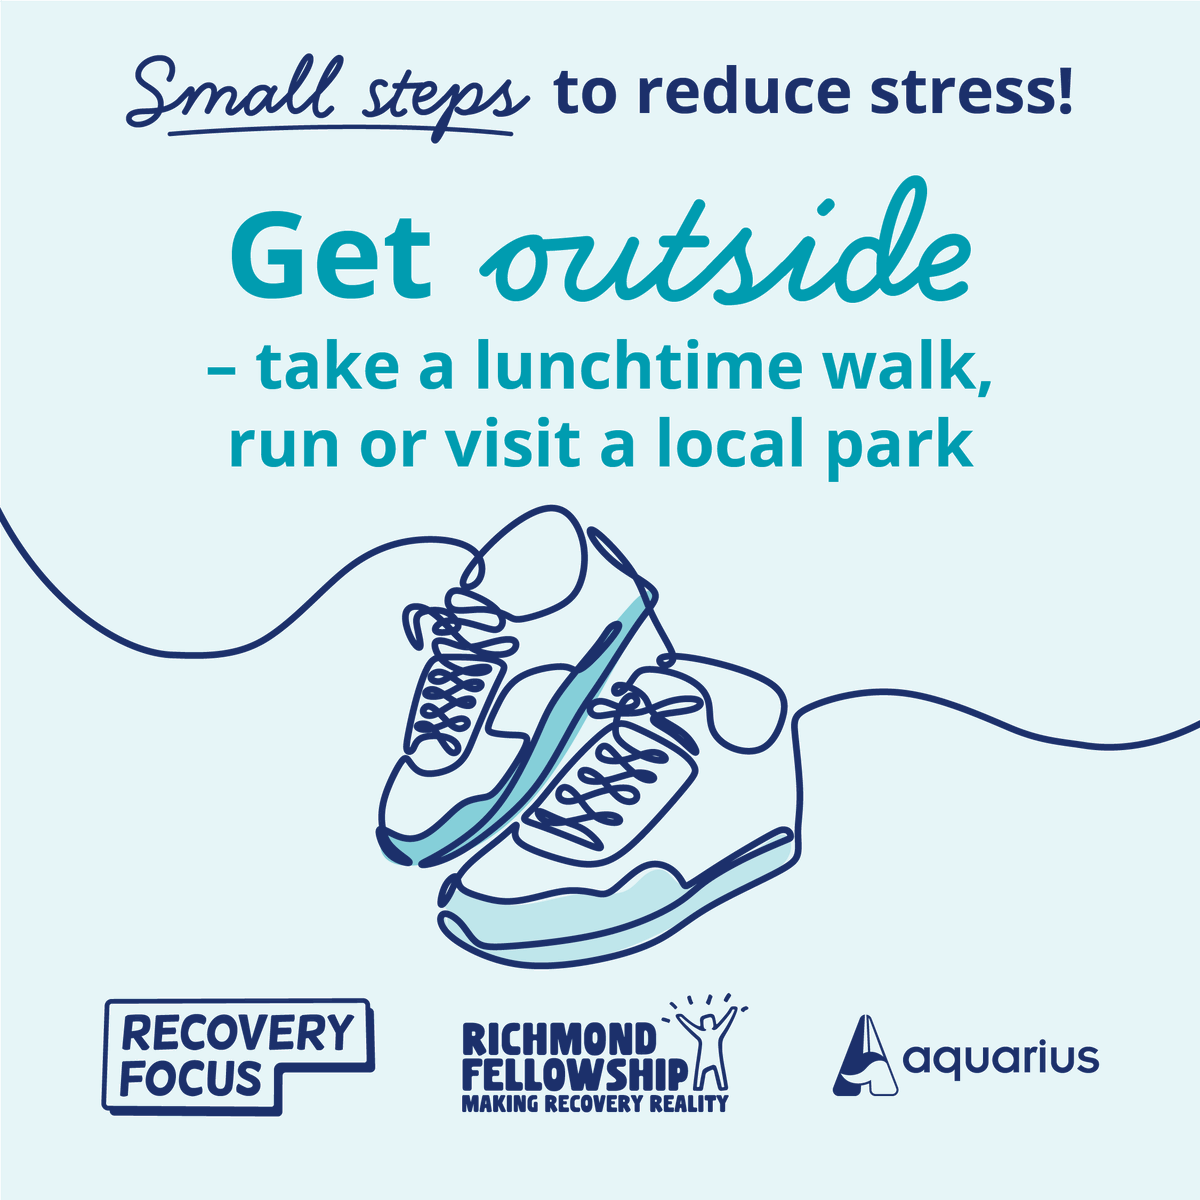 As #StressAwarenessMonth comes to a close, remember: small steps make mighty impacts on mental health! Try to get outside at least once a day for a mood boost and stress relief 🚶 #LittleByLittle